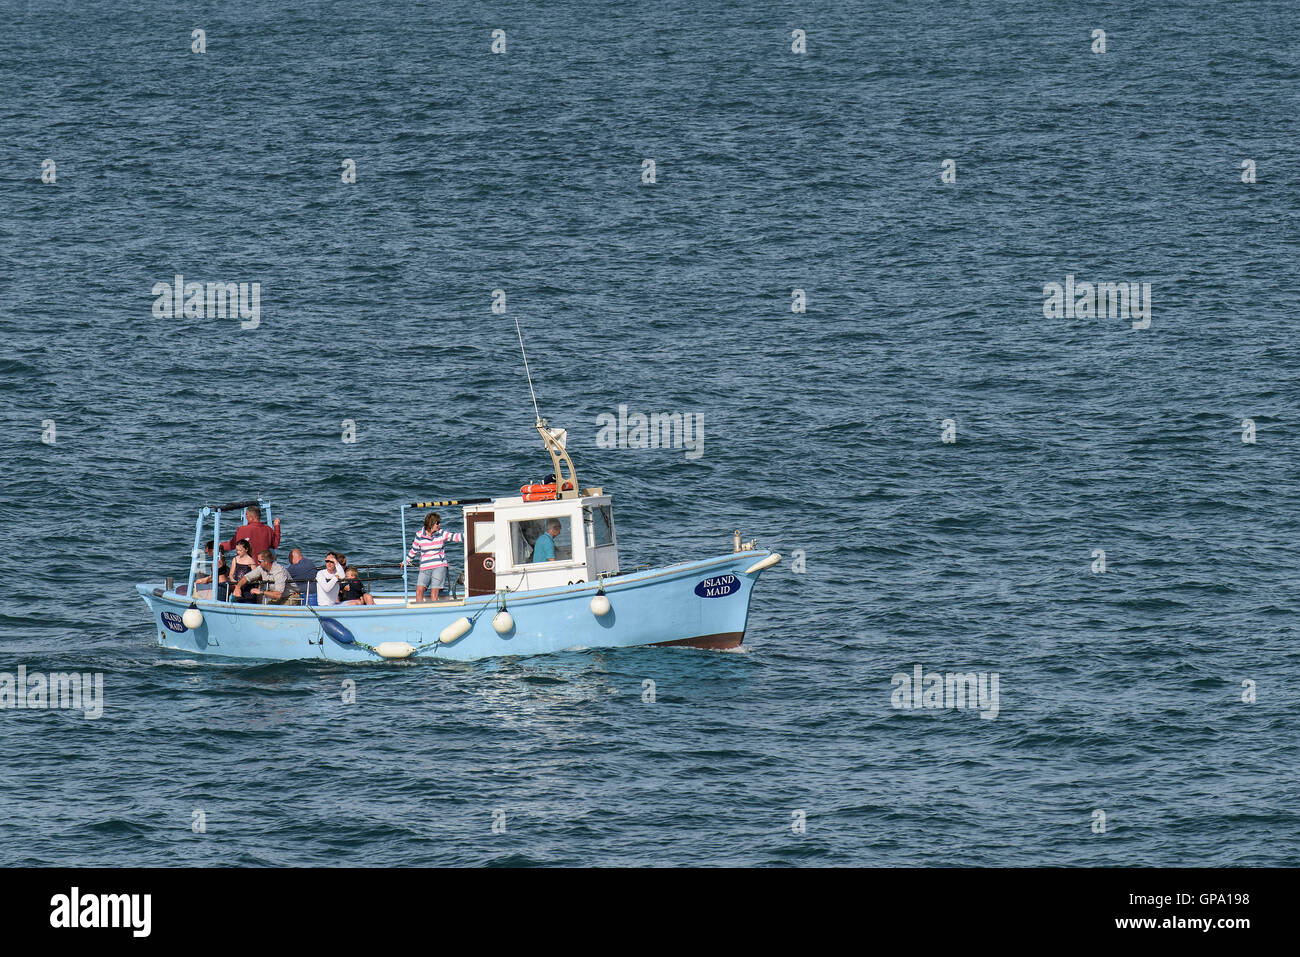 Island Maid, a pleasure boat full of holidaymakers mackerel fishing in Newquay Bay, Cornwall. Stock Photo